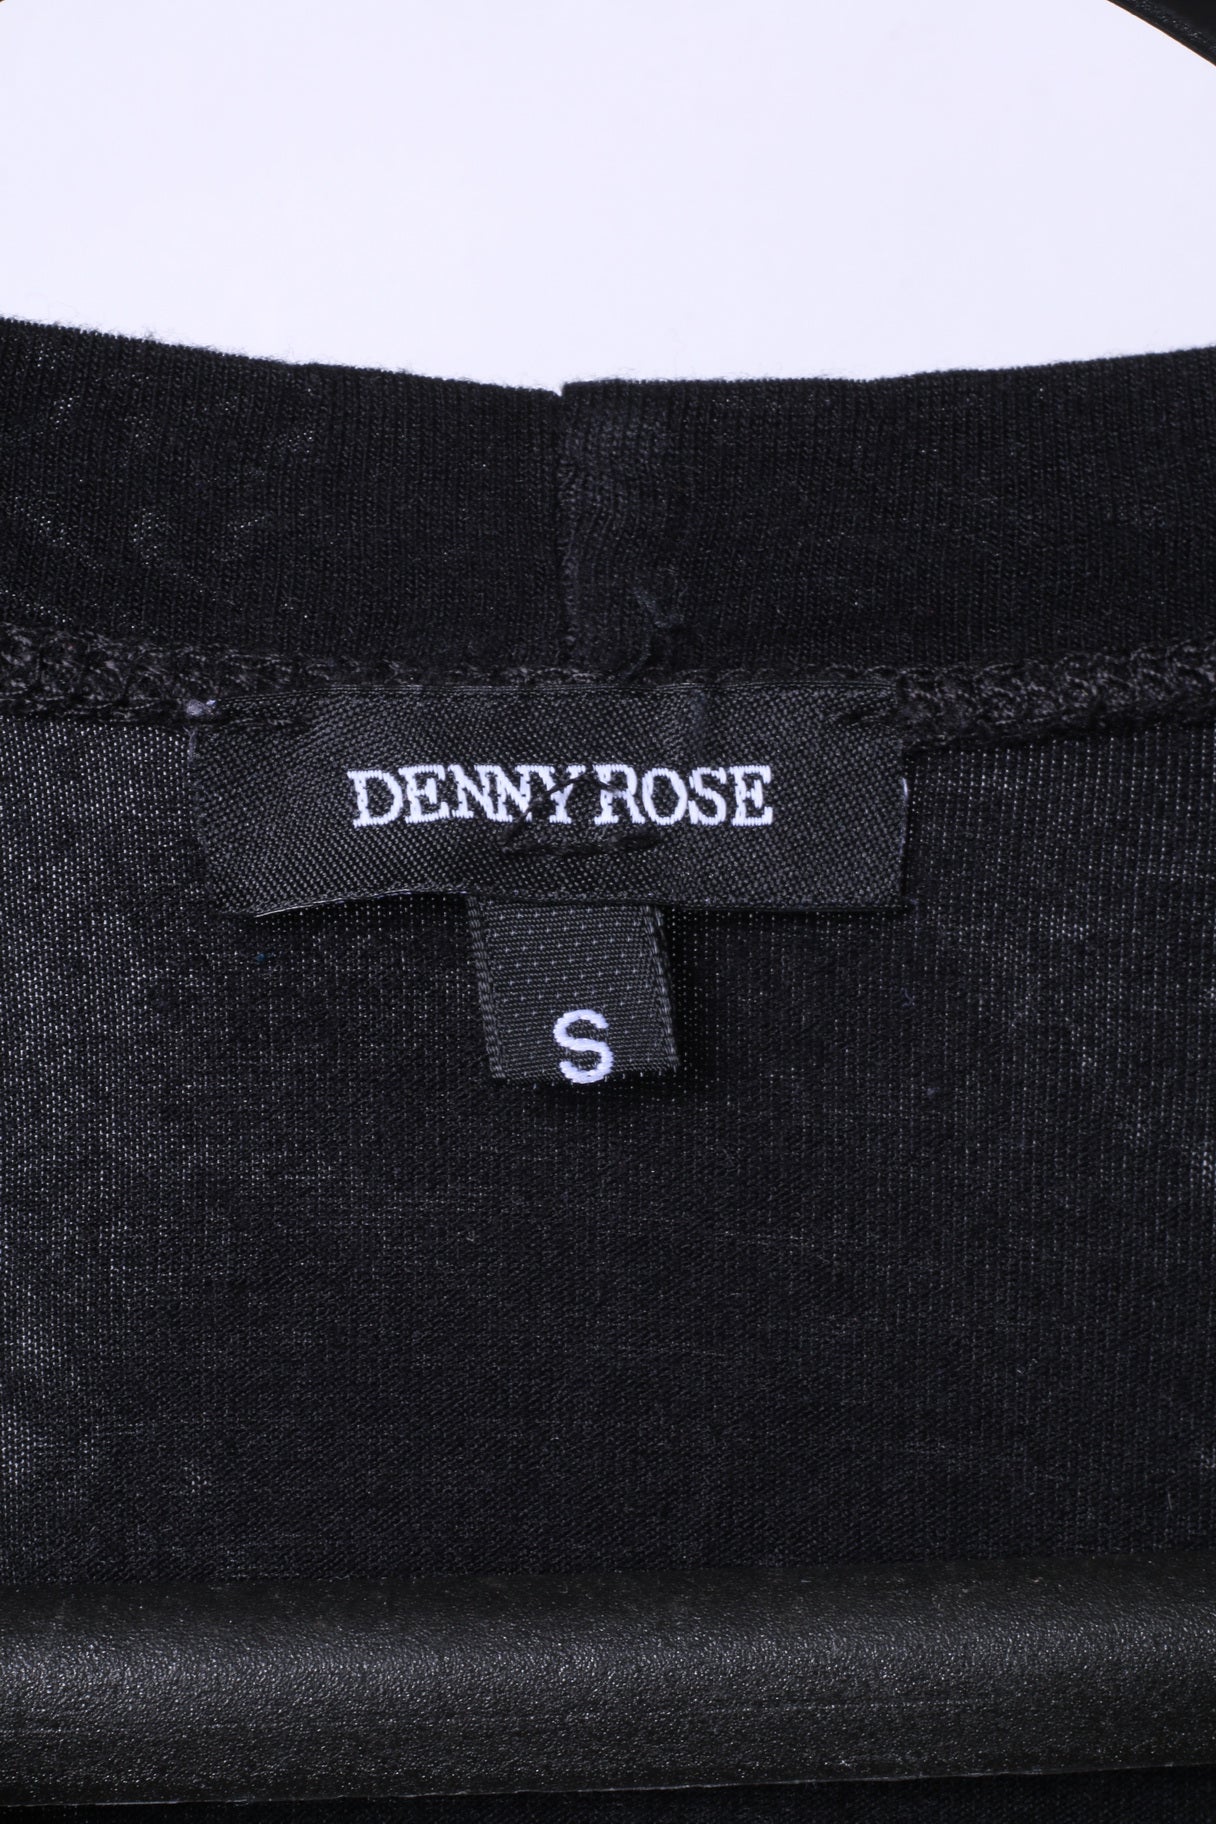 Denny Rose Womens S Shirt Black Graphic Heart Stretch Fit Top Made in Italy